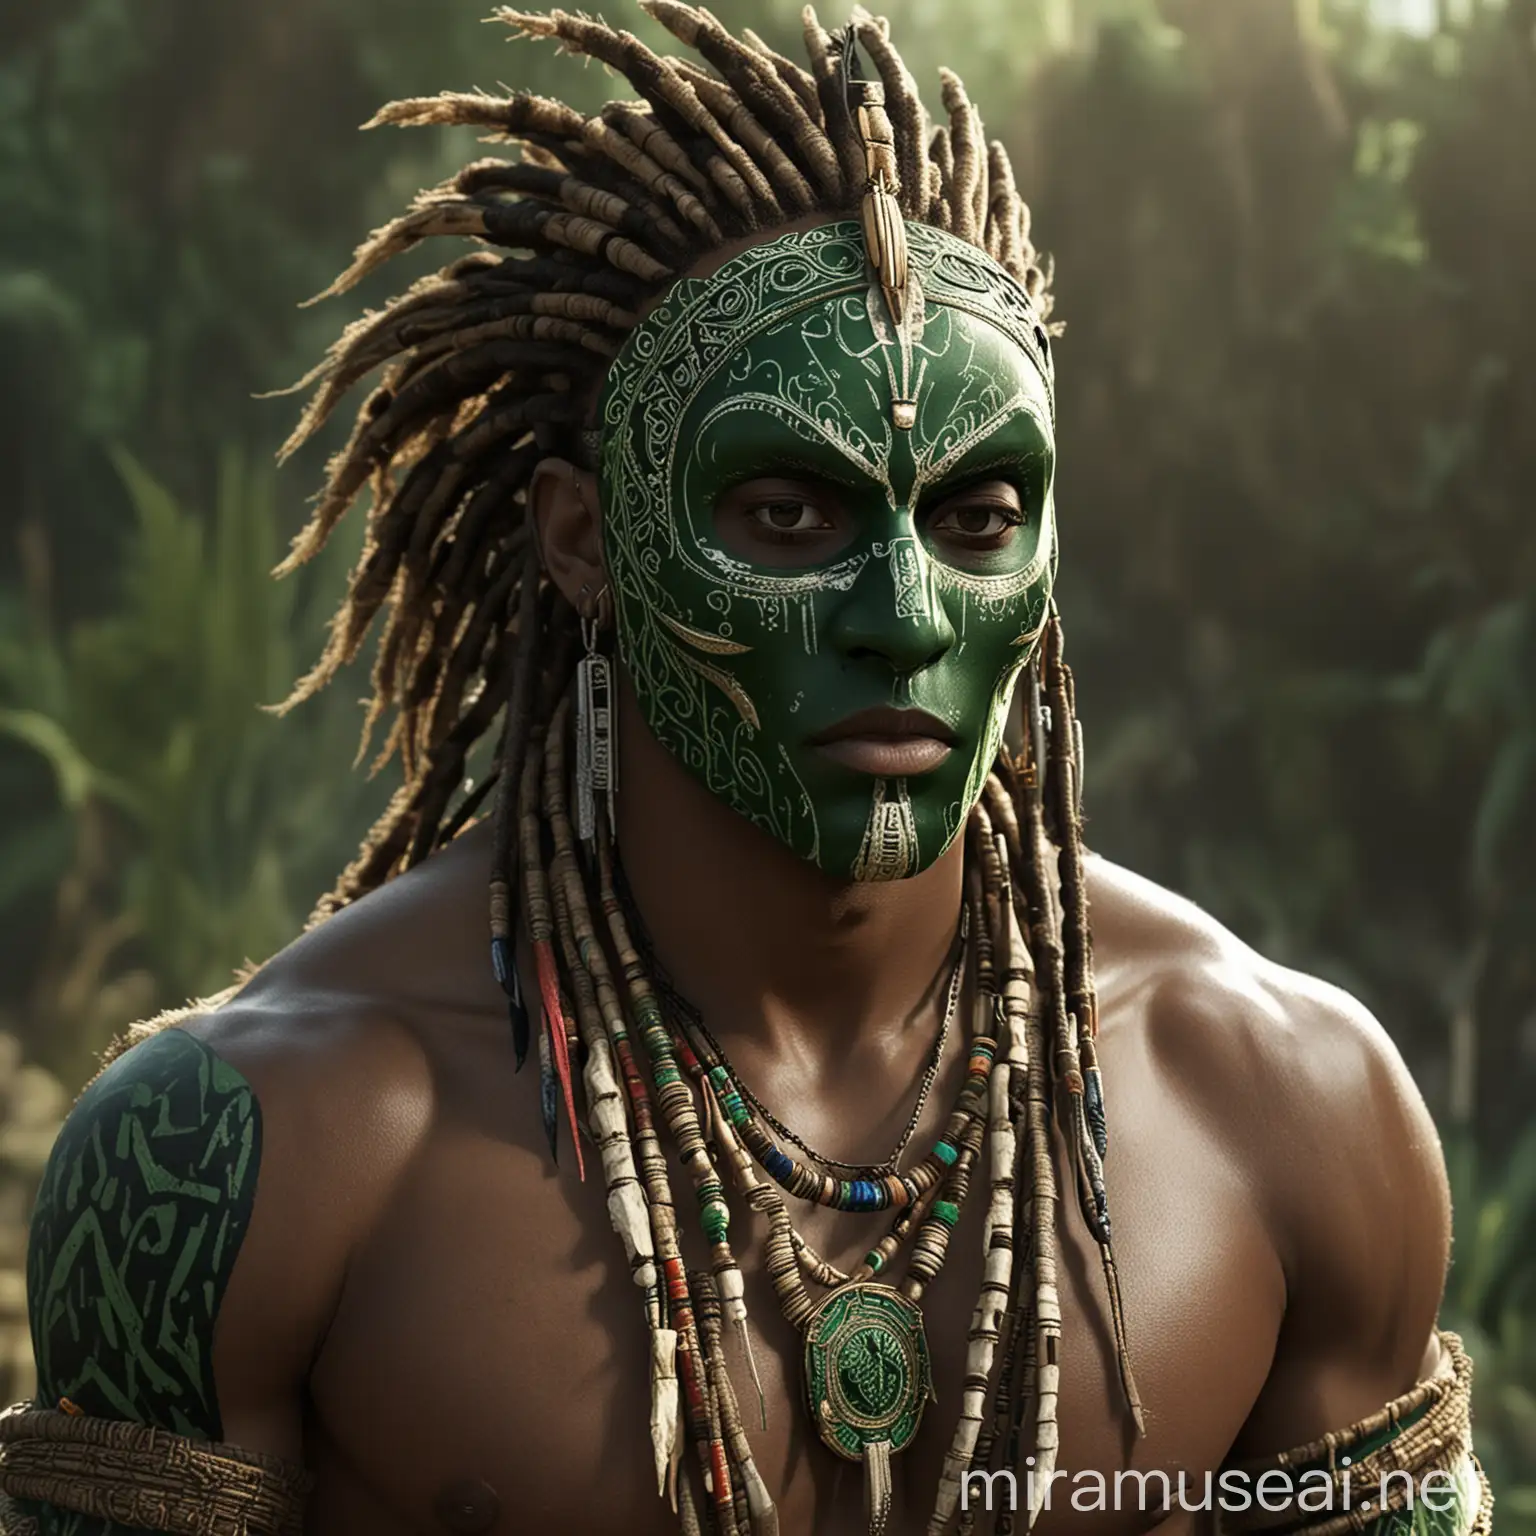 Ludacris is Usain Djisse the Green in #EvernaSaga #crystalwars 

Prompts: (full tribal masked:1.4) (best quality), (masterpiece), a mean and lean medieval tribal fantasy African assassin man, deadlock rasta-style hair, wearing black and green clothes, dynamic pose (tribal atmosphere:1.2), (pattern details:1.1), (intricate design), (intricate details:1.15), (ethereal vibes)